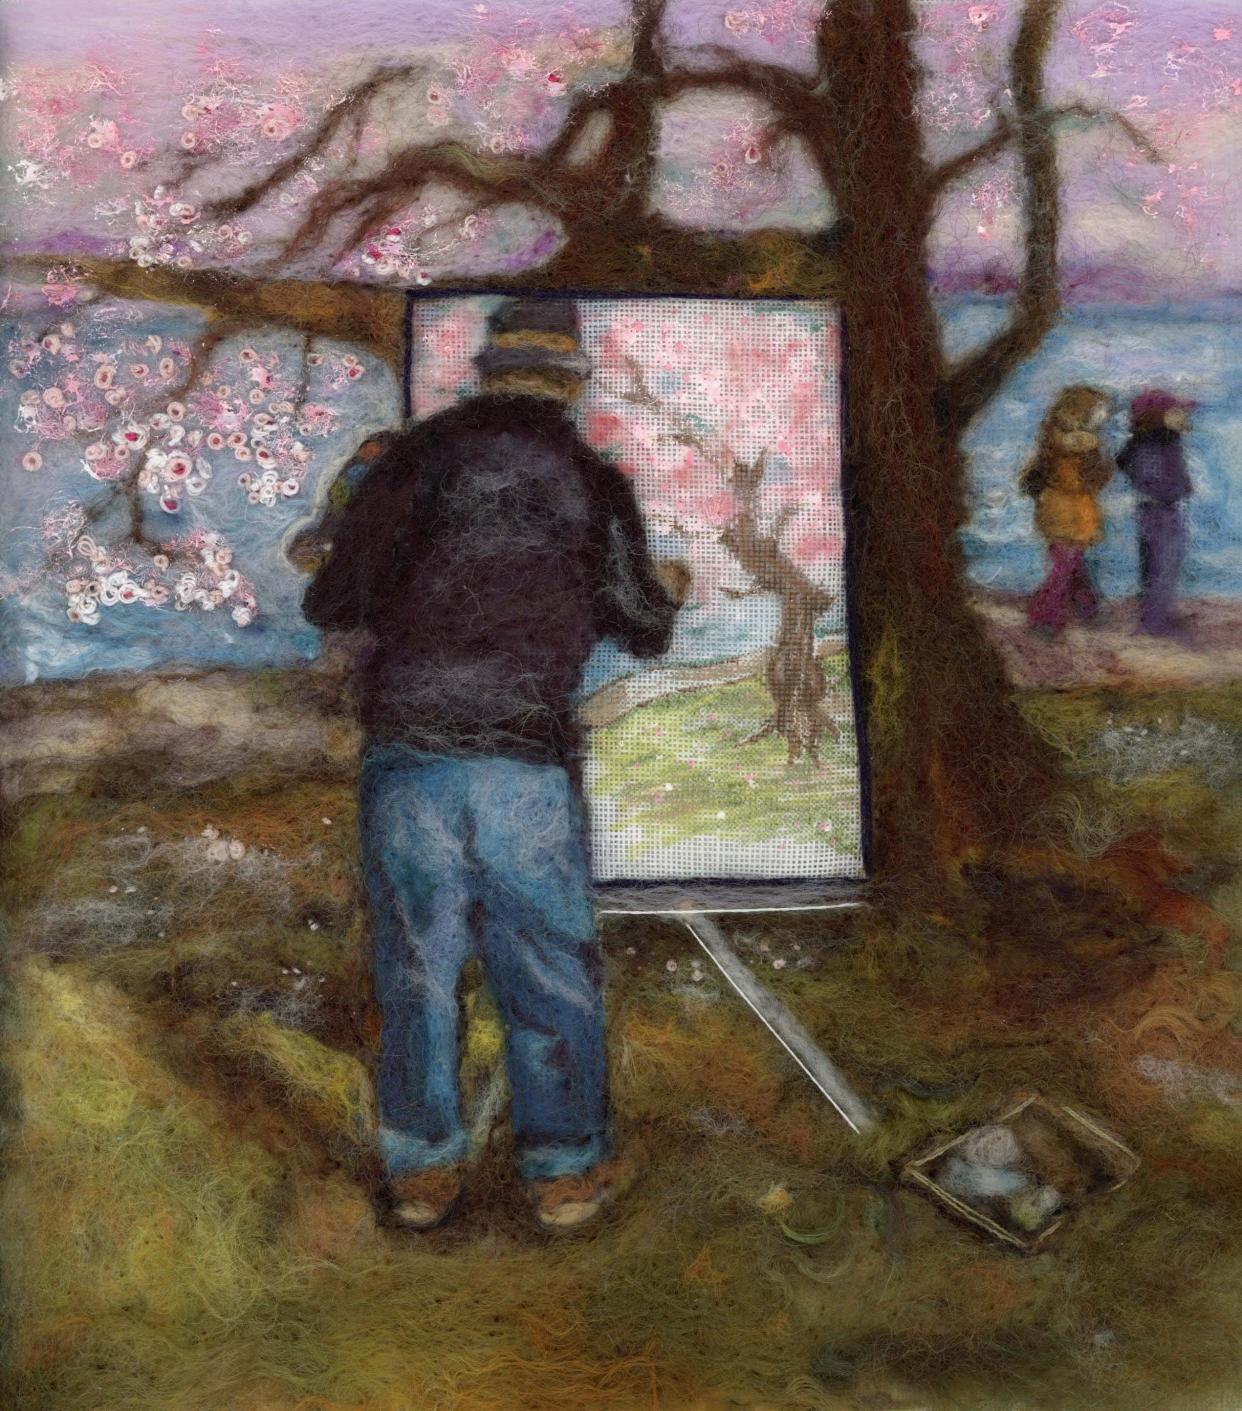 "En Plein Air" by Christine Blomquist. This work was needle felted with dyed wool onto linen.